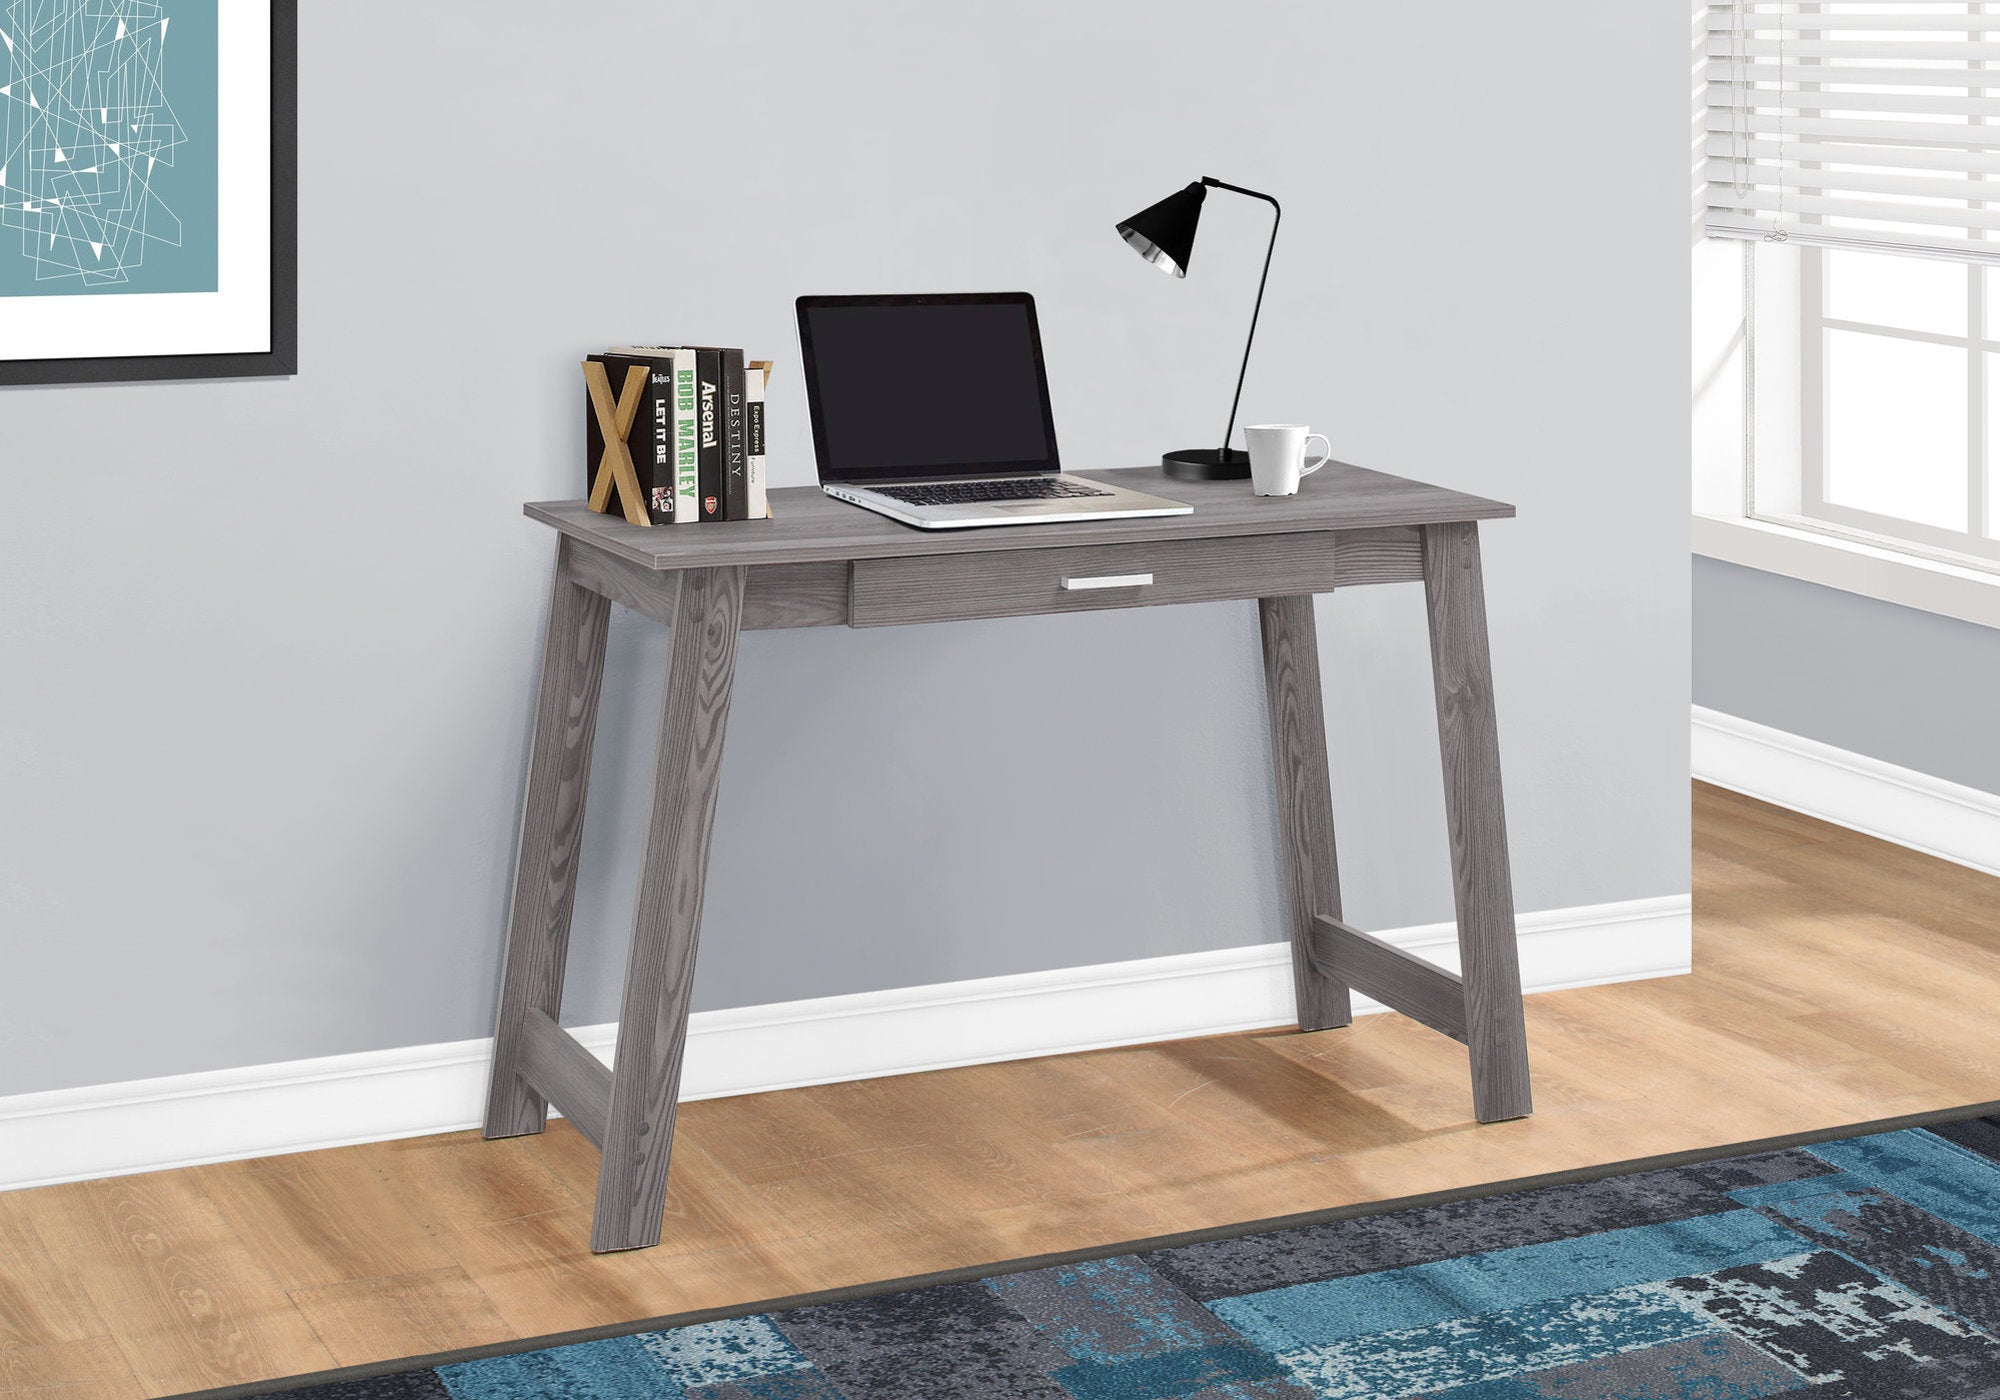 MN-397192    Computer Desk, Home Office, Laptop, Storage Drawers, Laminate, Grey, Contemporary, Modern